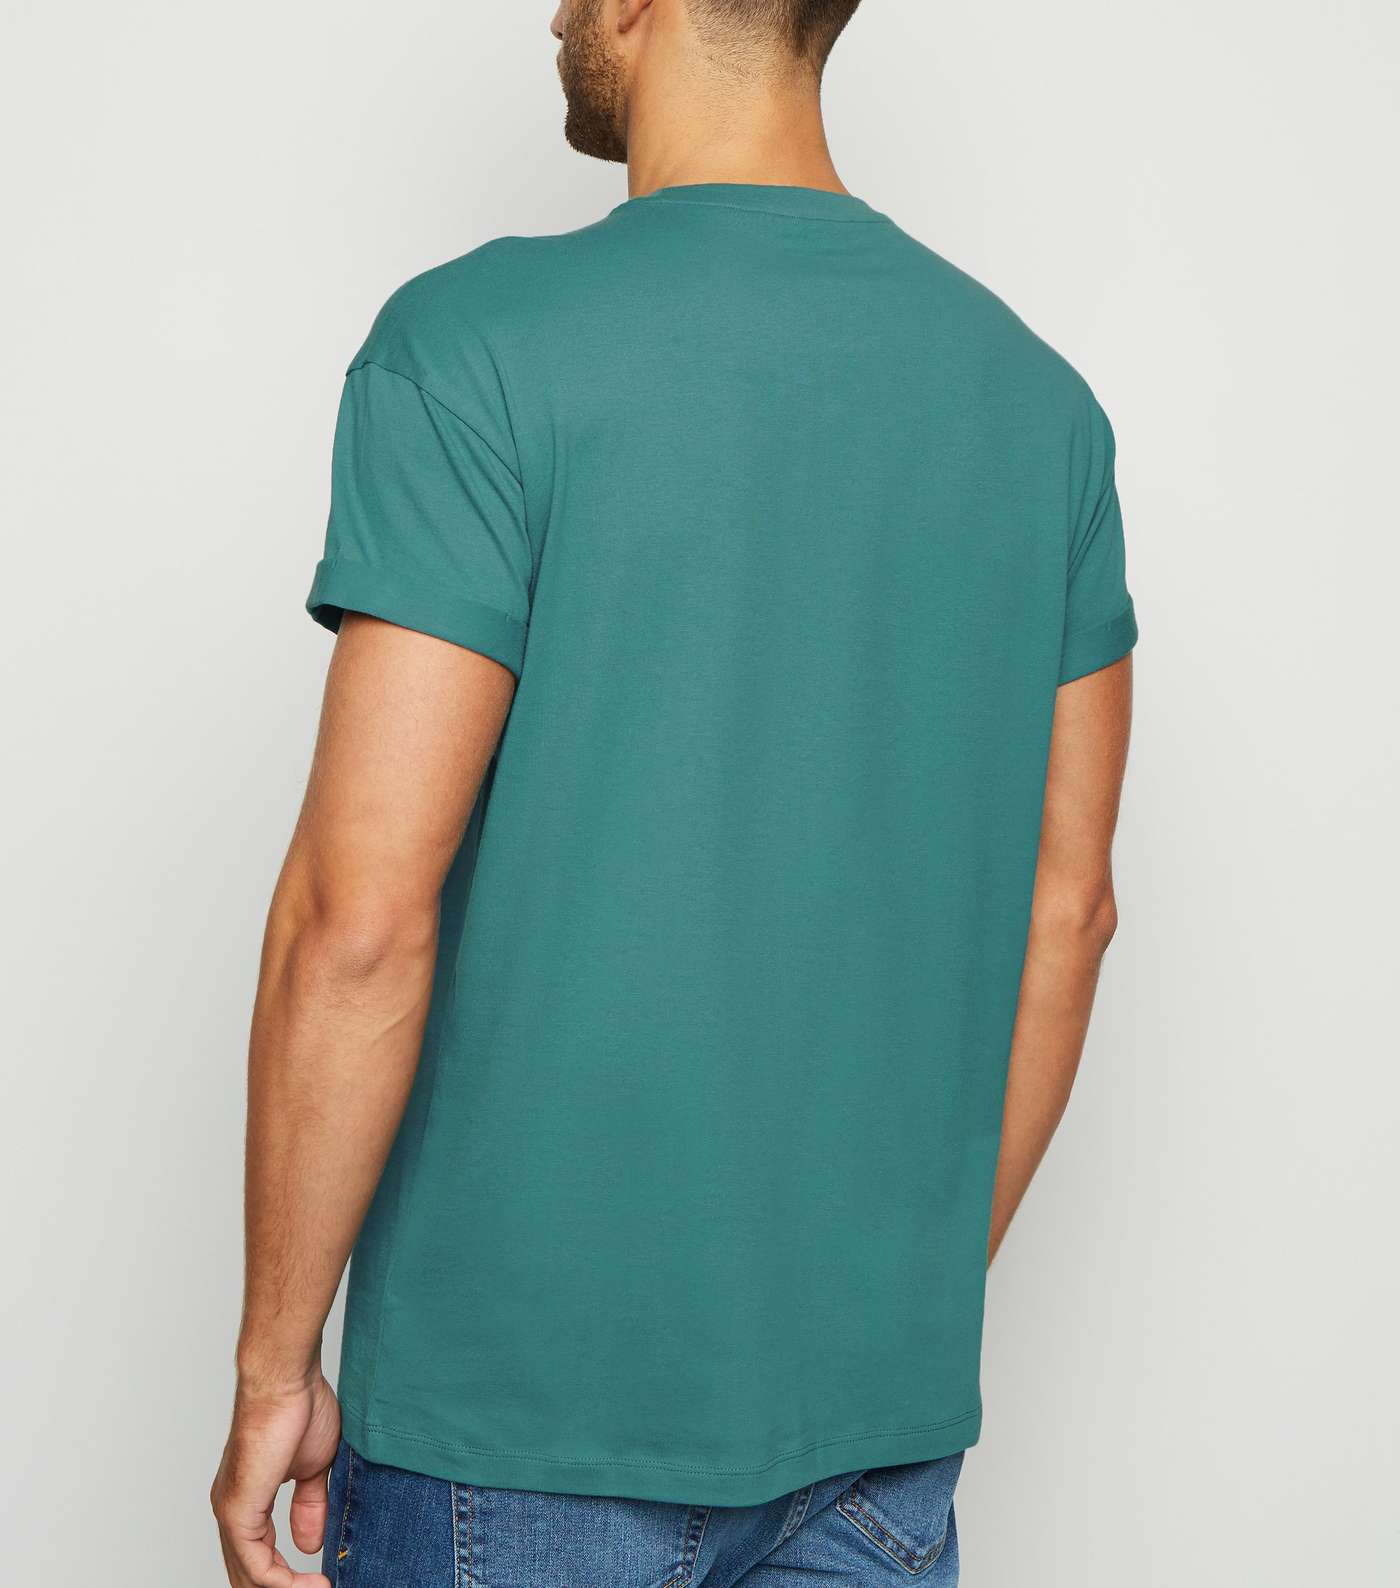 Teal Cotton Short Roll Sleeve T-Shirt Image 3